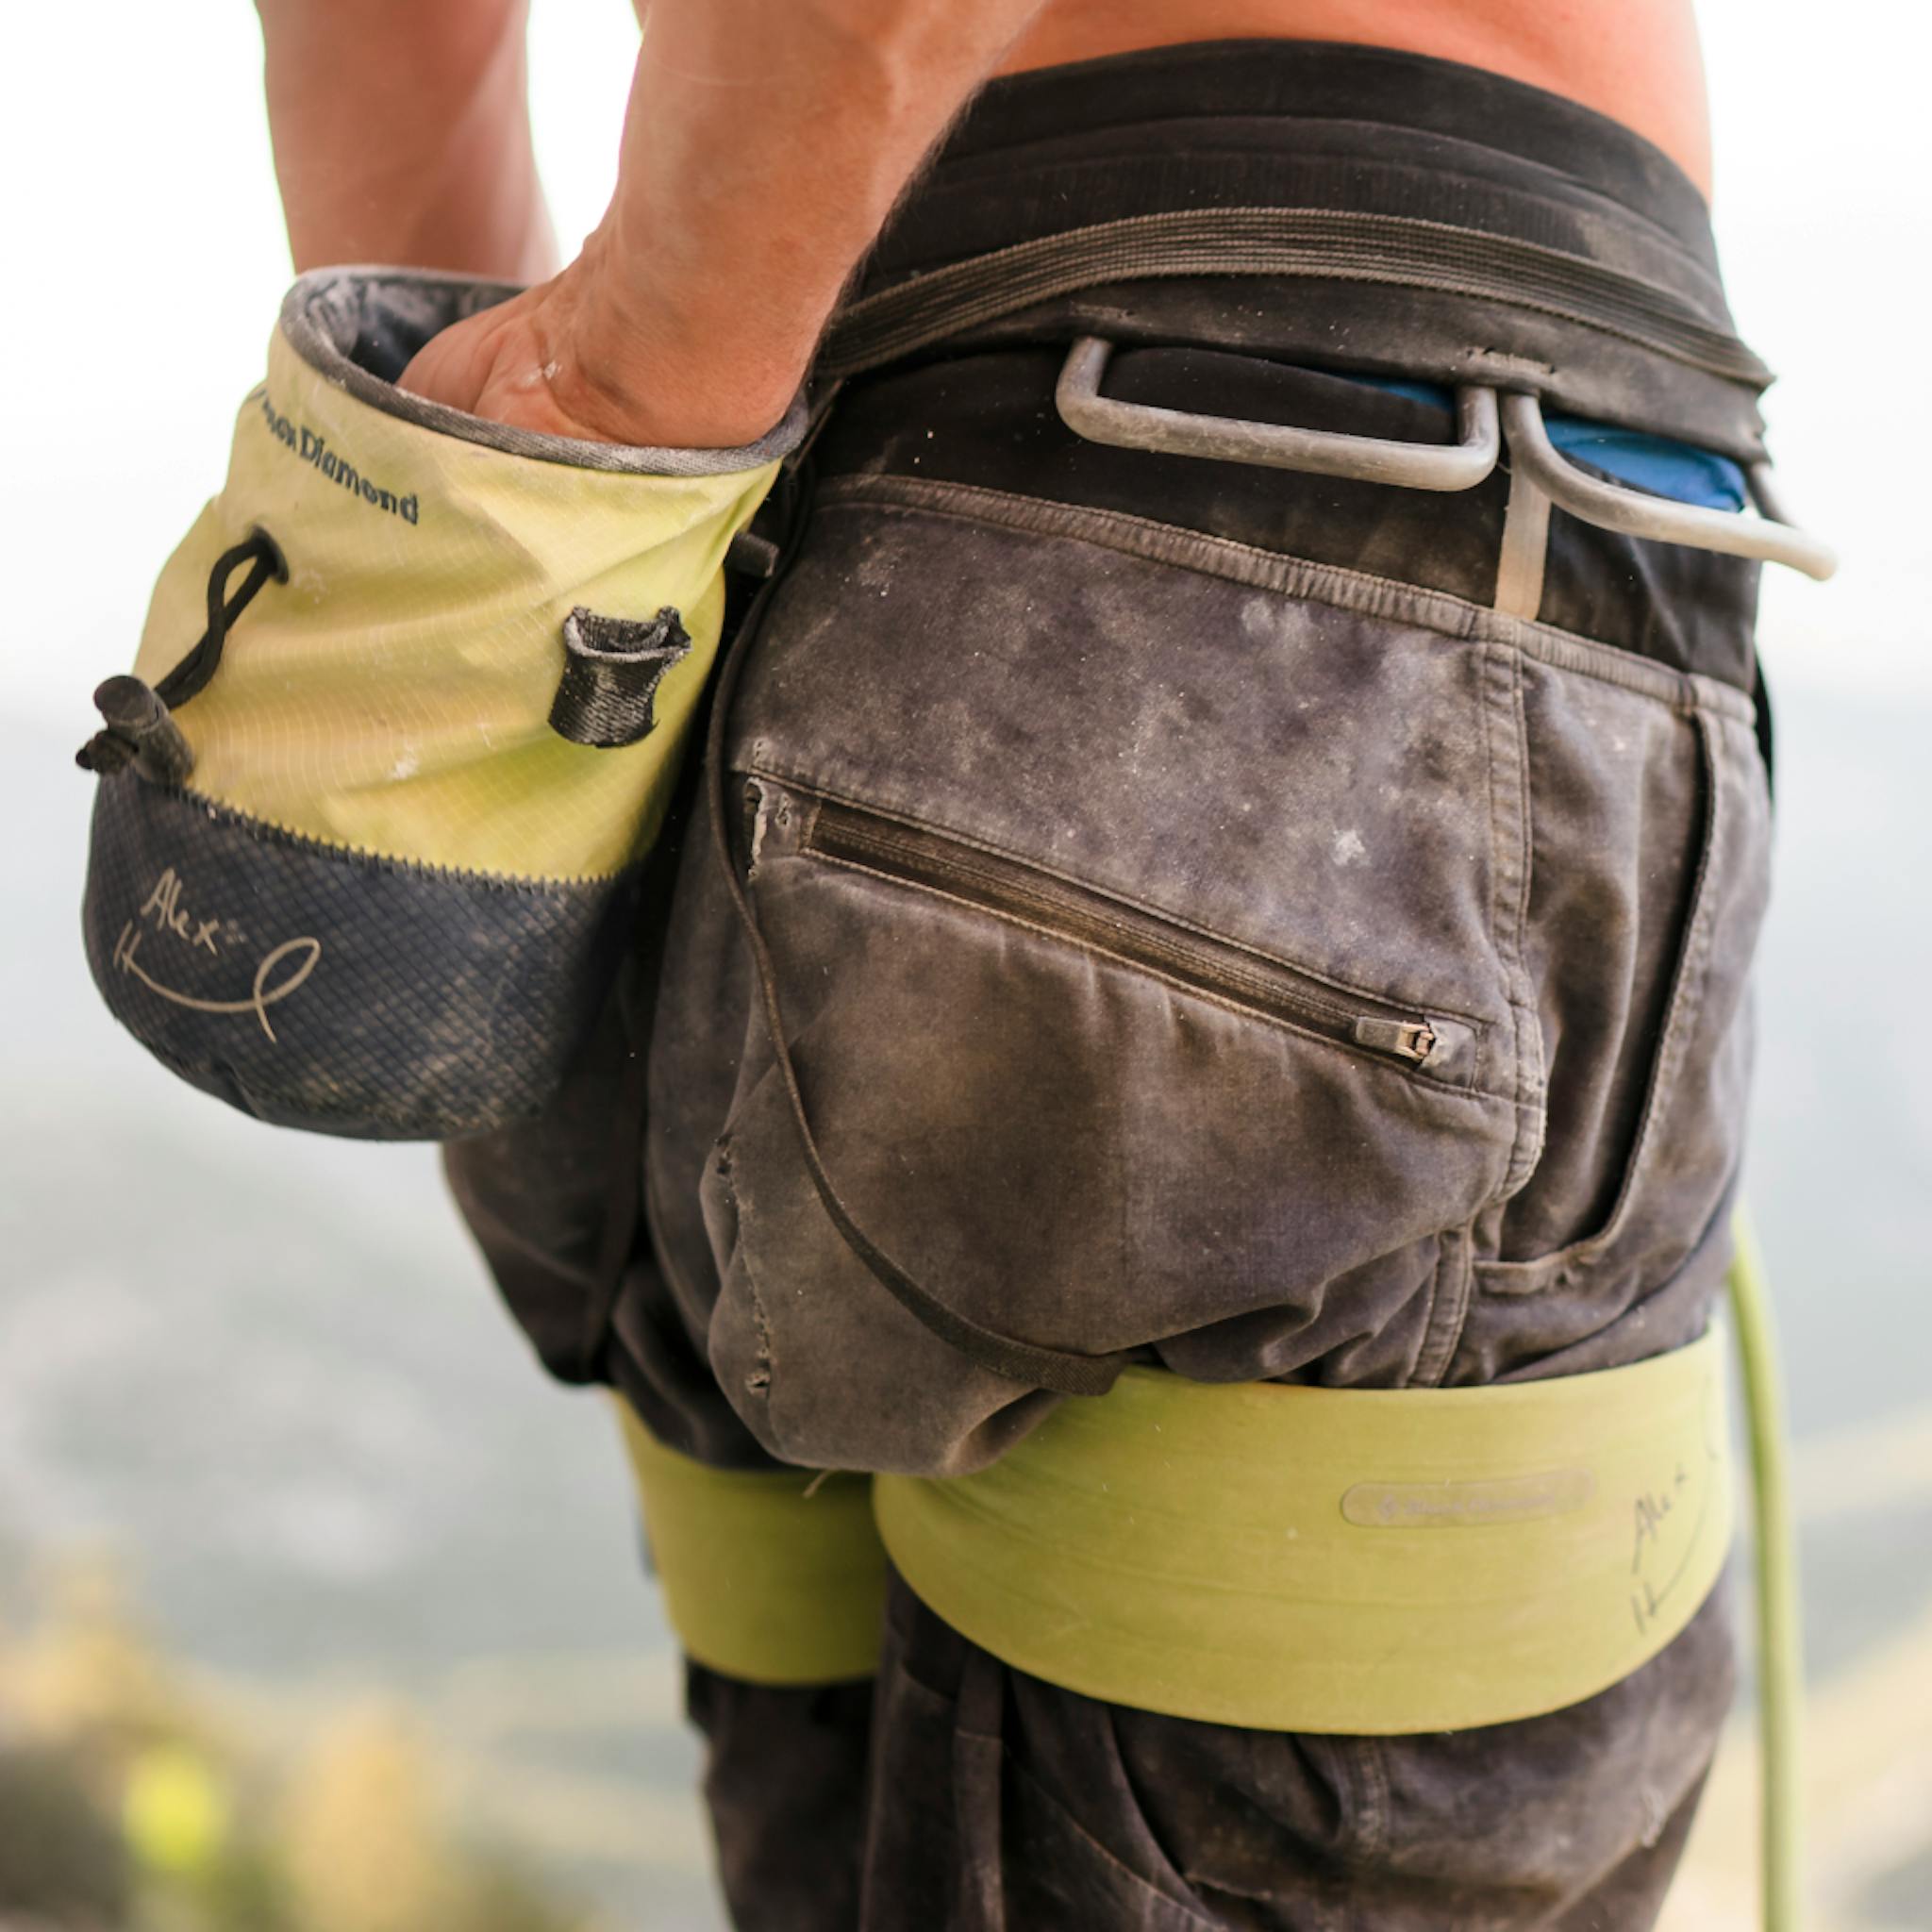 BD Athlete Alex Honnold reaches into his chalk bag wearing a Solution Harness- Alex Honnold Edition.